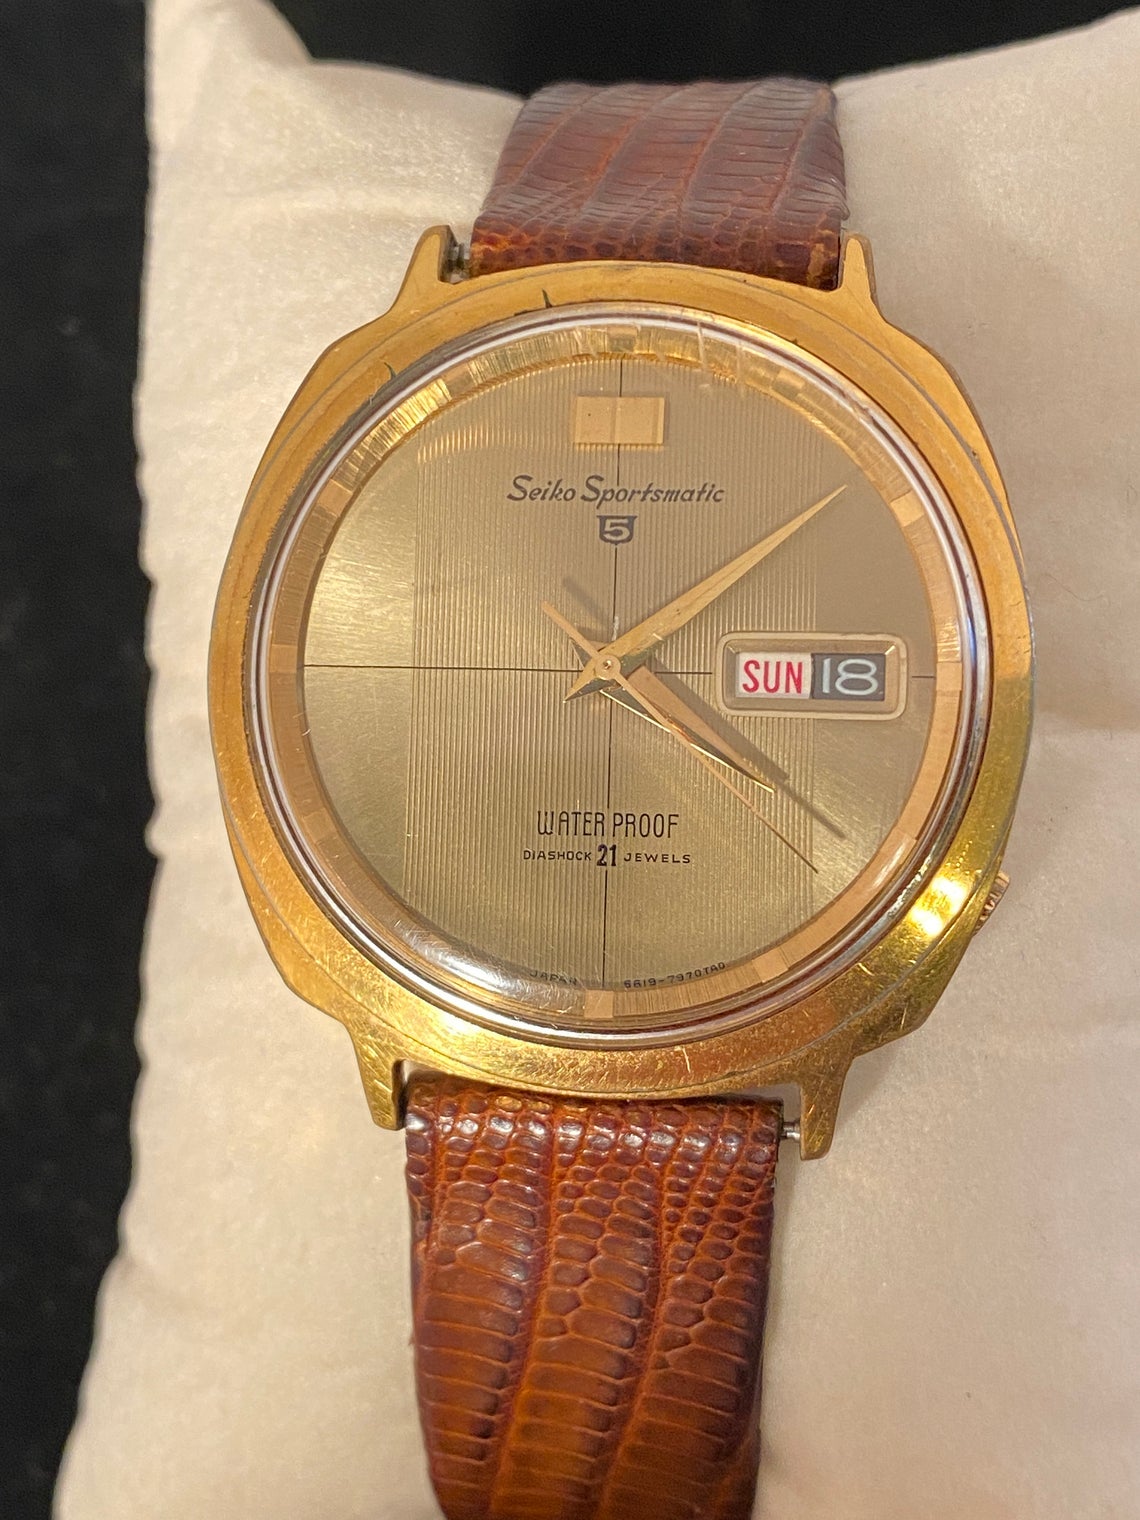 Vintage Watch Selection - SEIKO SPORTSMATIC 5 The Walkabout Company